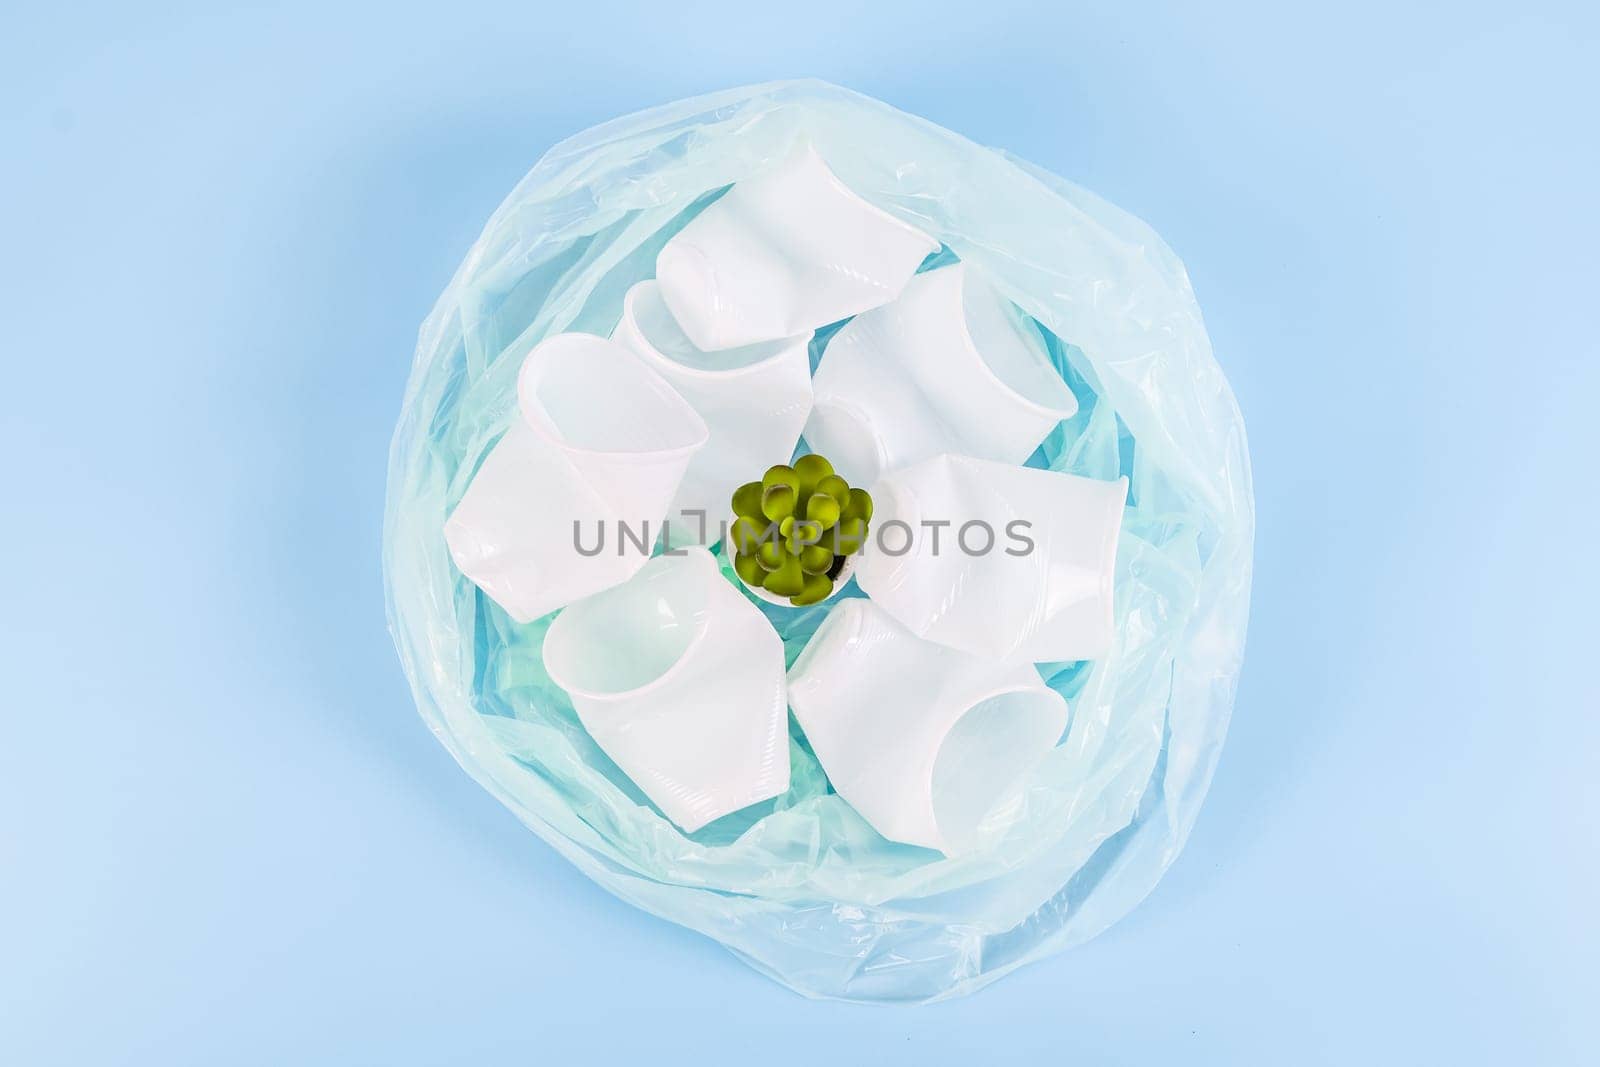 Crumpled plastic disposable cups and a succulent flower in a plastic bag lie on a pastel blue background, flat lay closeup. Eco-friendly concept, disposable tableware and ecology day.